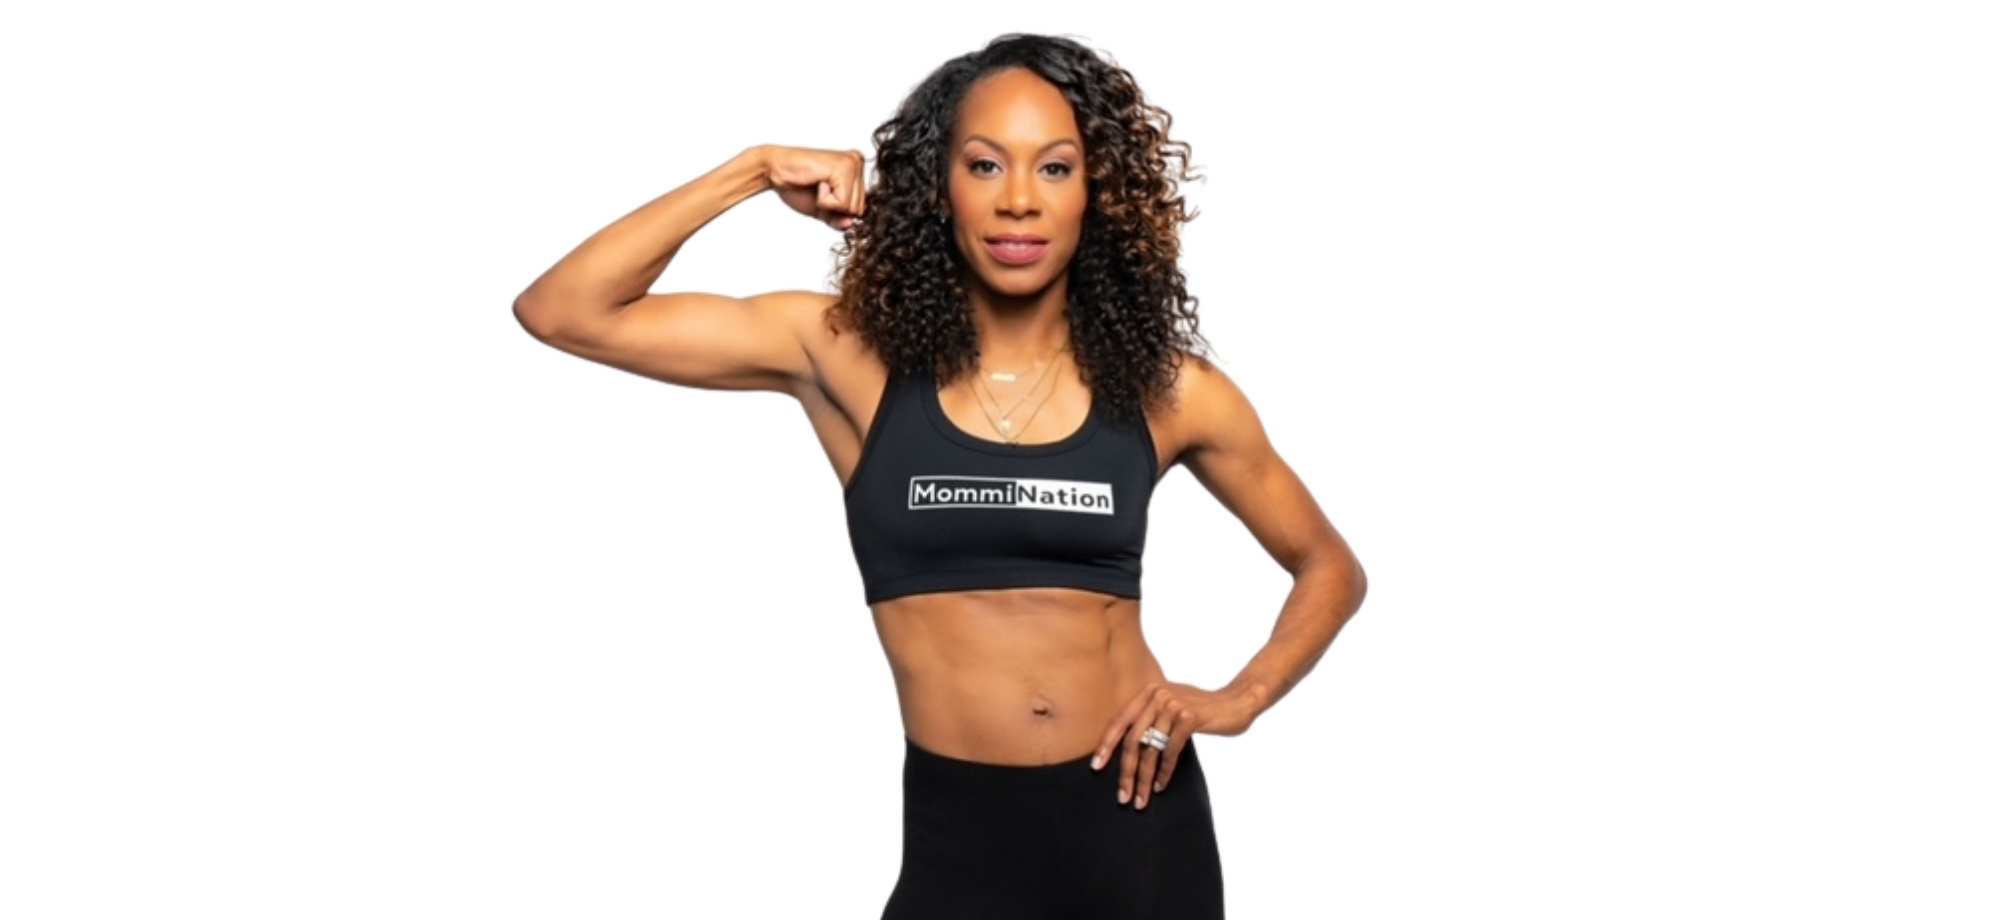 4x Olympic Gold Sprinter Sanya Richards-Ross on Training Your Mind and the Importance of Support